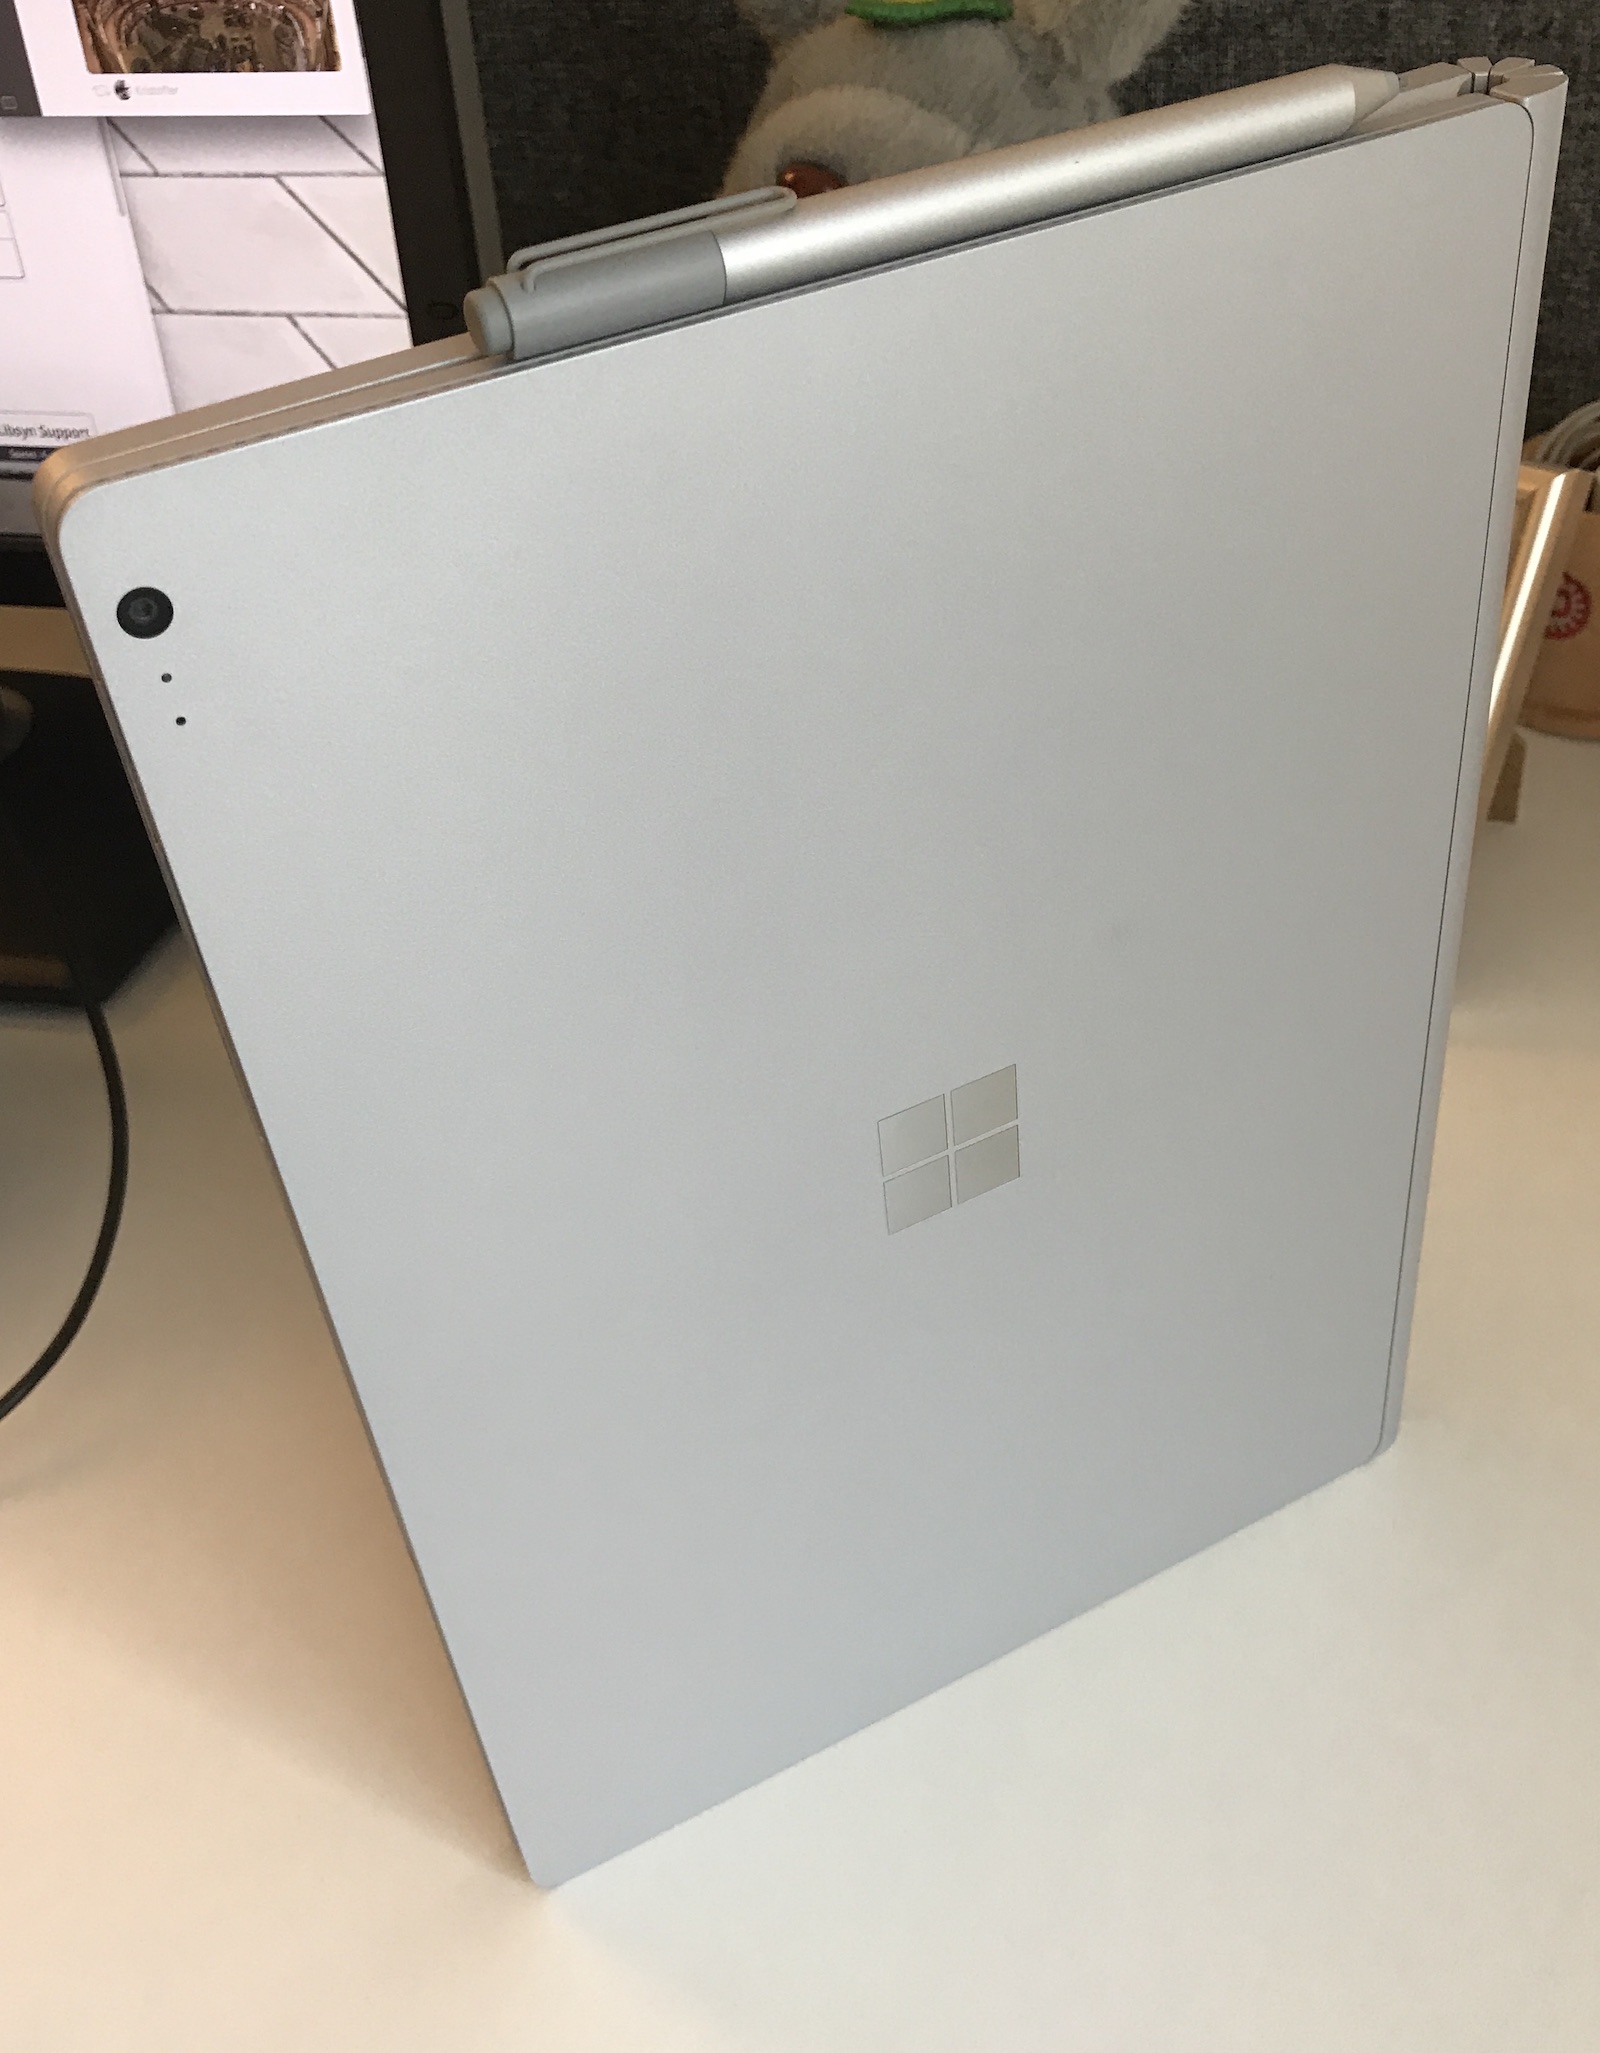 Surface book standing on side